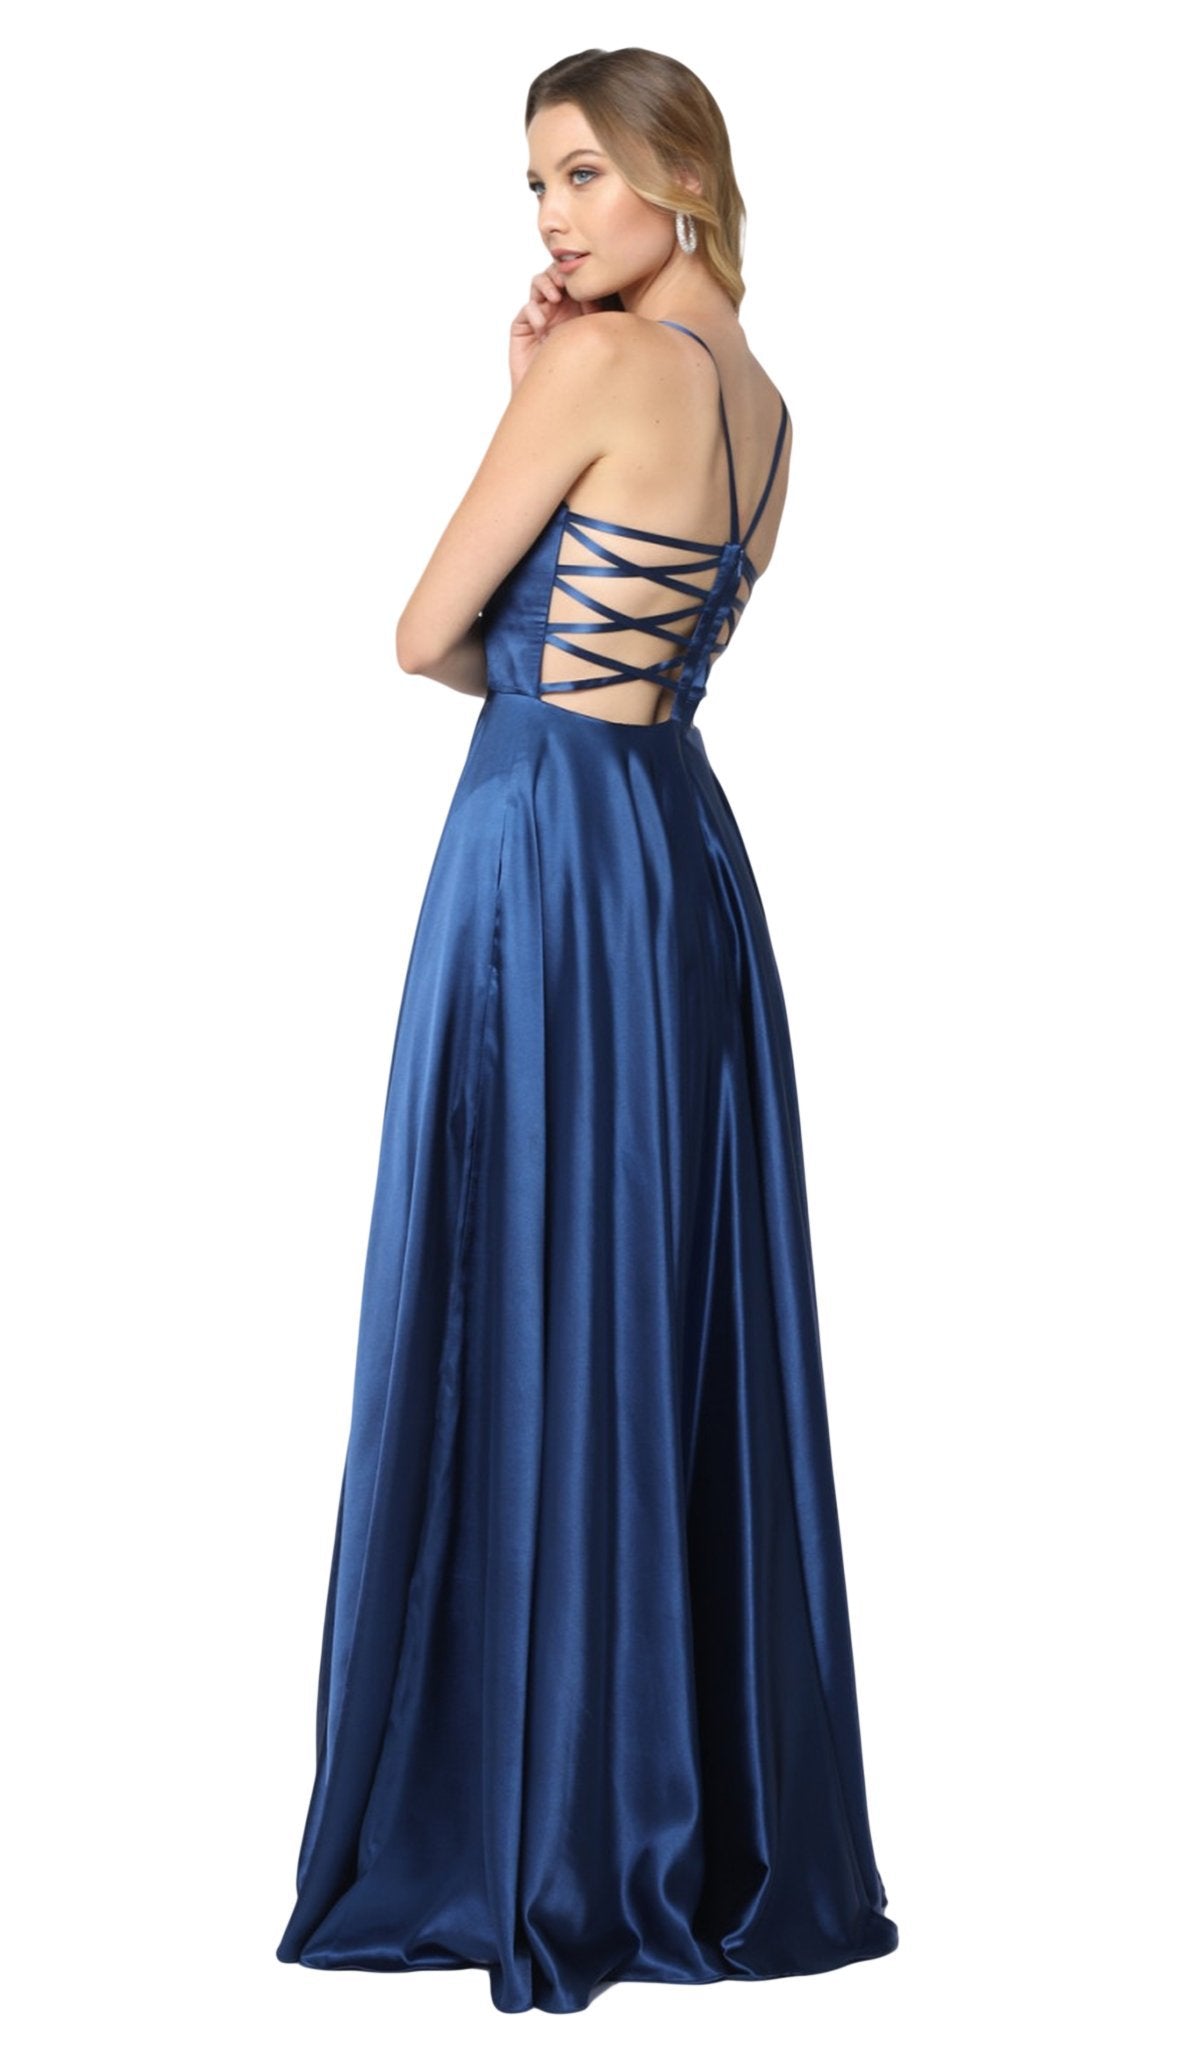 Nox Anabel - A180 Deep V-neck A-line Dress With Strappy Back Special Occasion Dress